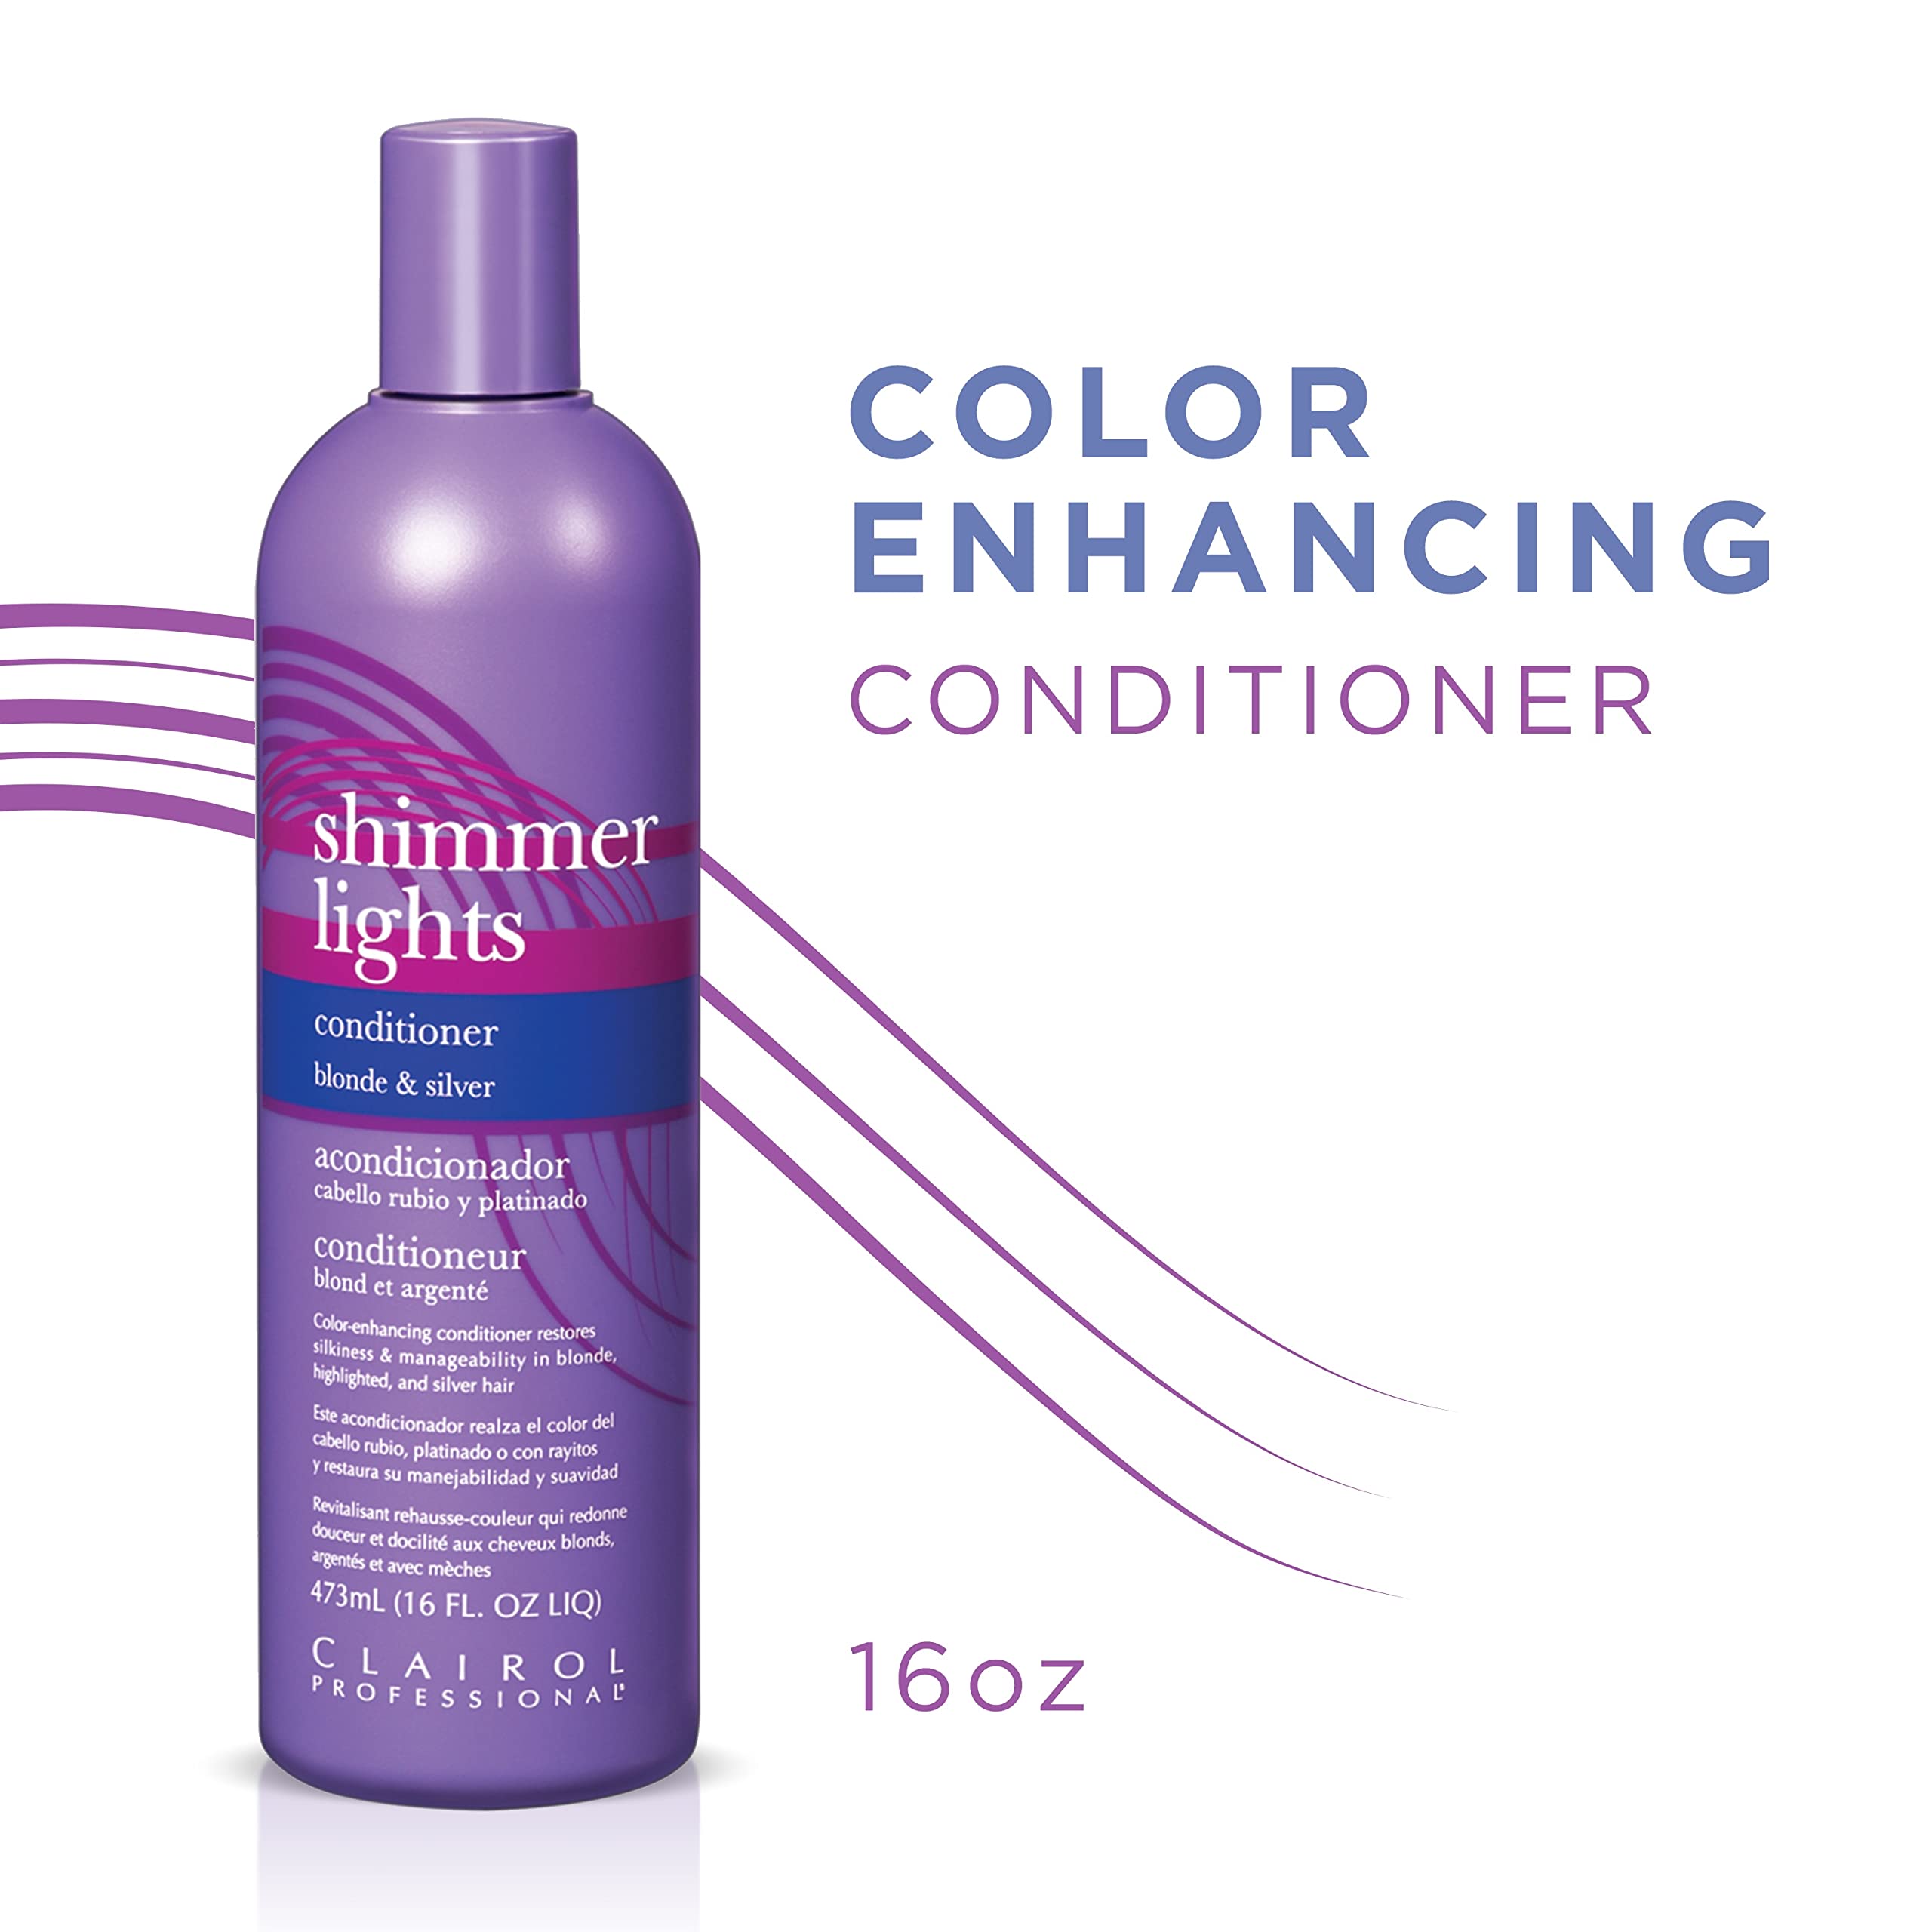 Clairol Professional Shimmer Lights Purple Conditioner, 16 fl. Oz | Neutralizes Brass & Yellow Tones | For Blonde, Silver, Gray & Highlighted Hair